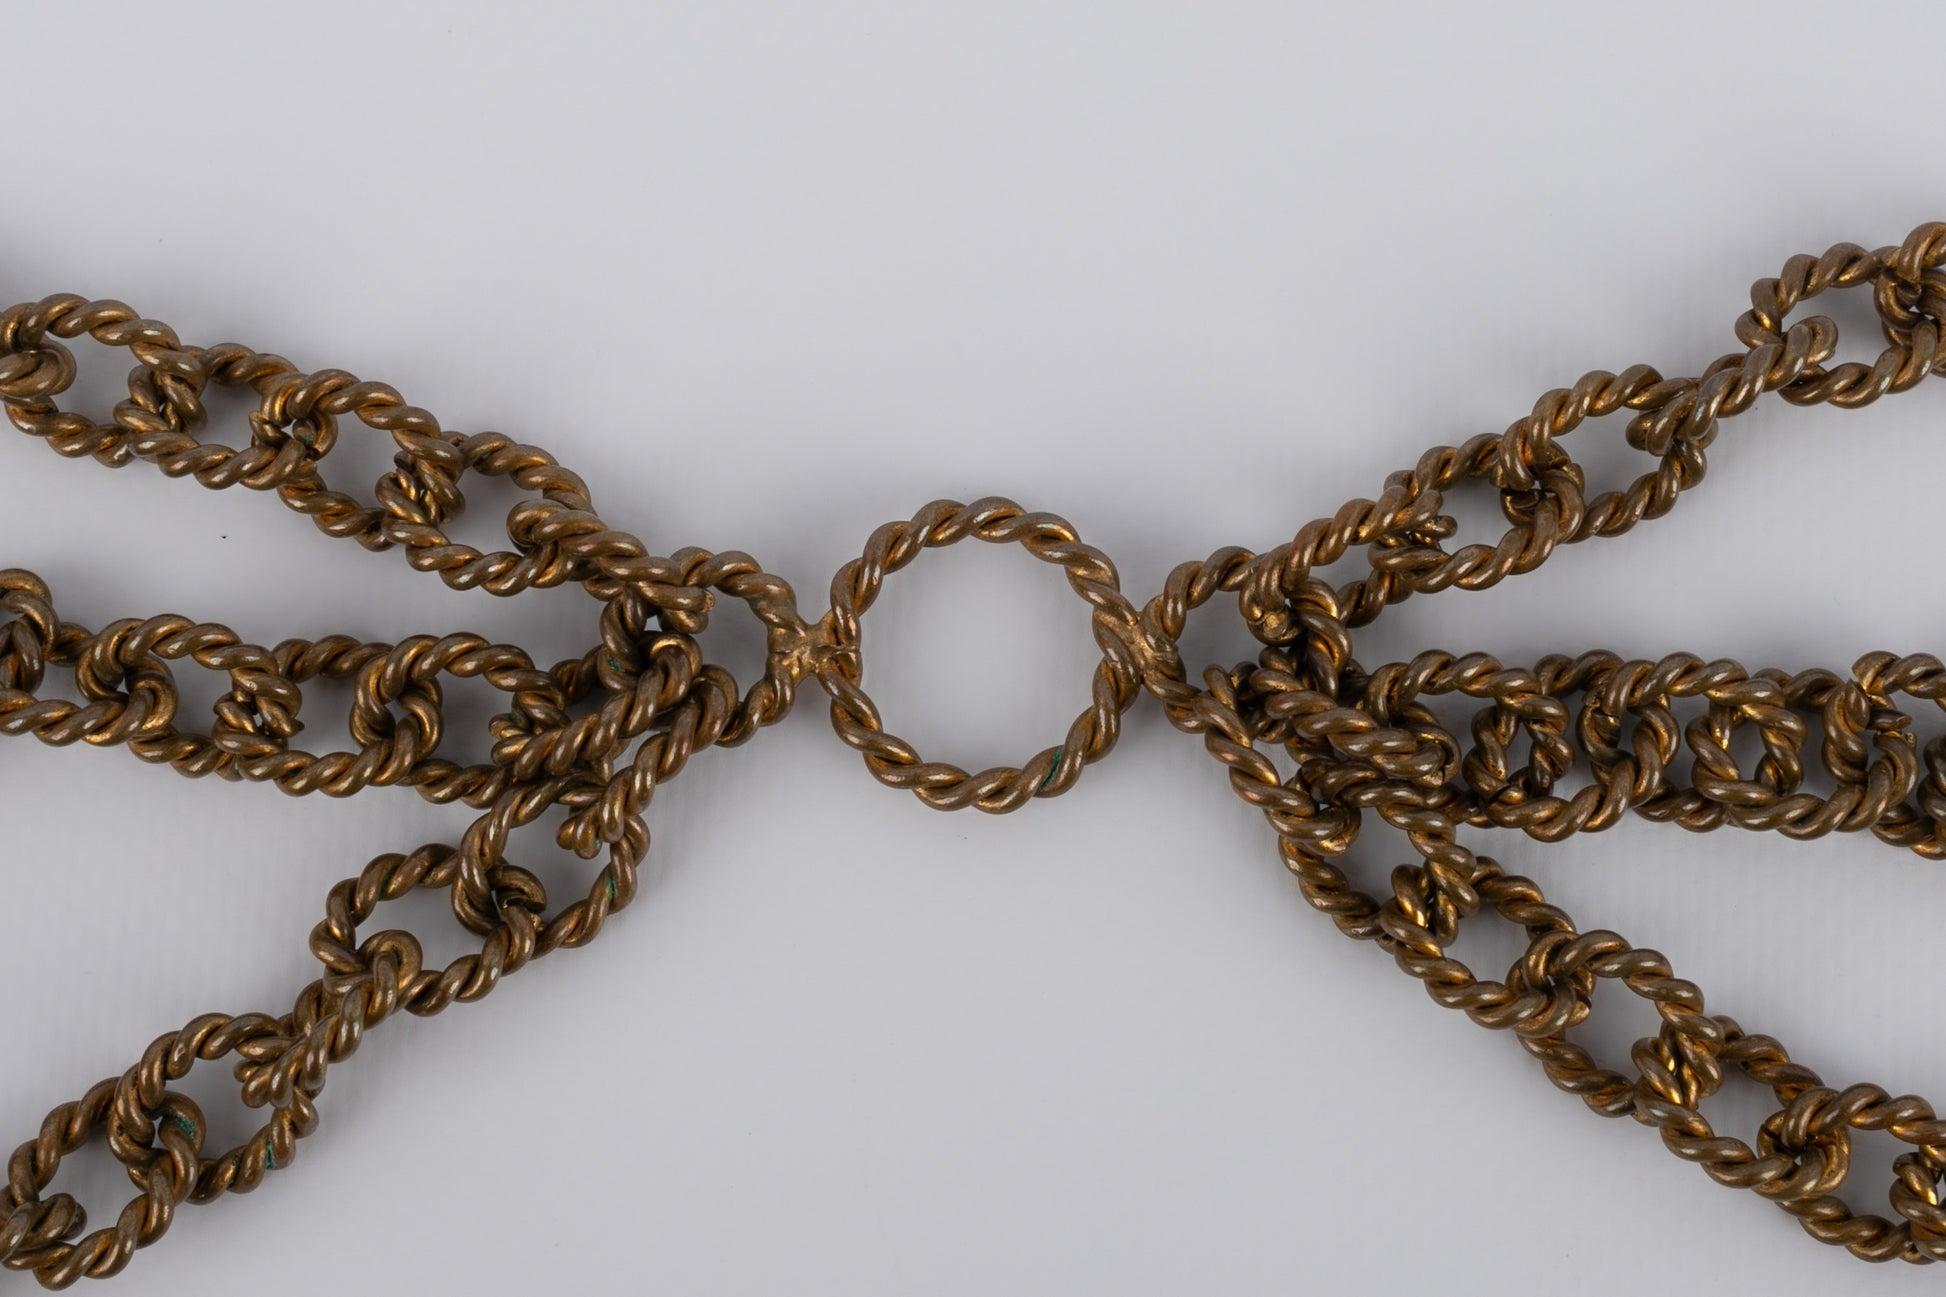 Yves Saint Laurent - Dark-golden metal multi-row necklace. 1960/70 circa Haute Couture Collection.

Additional information:
Condition: Very good condition
Dimensions: Length: 80 cm
Period: 20th Century

Seller Reference: BC94